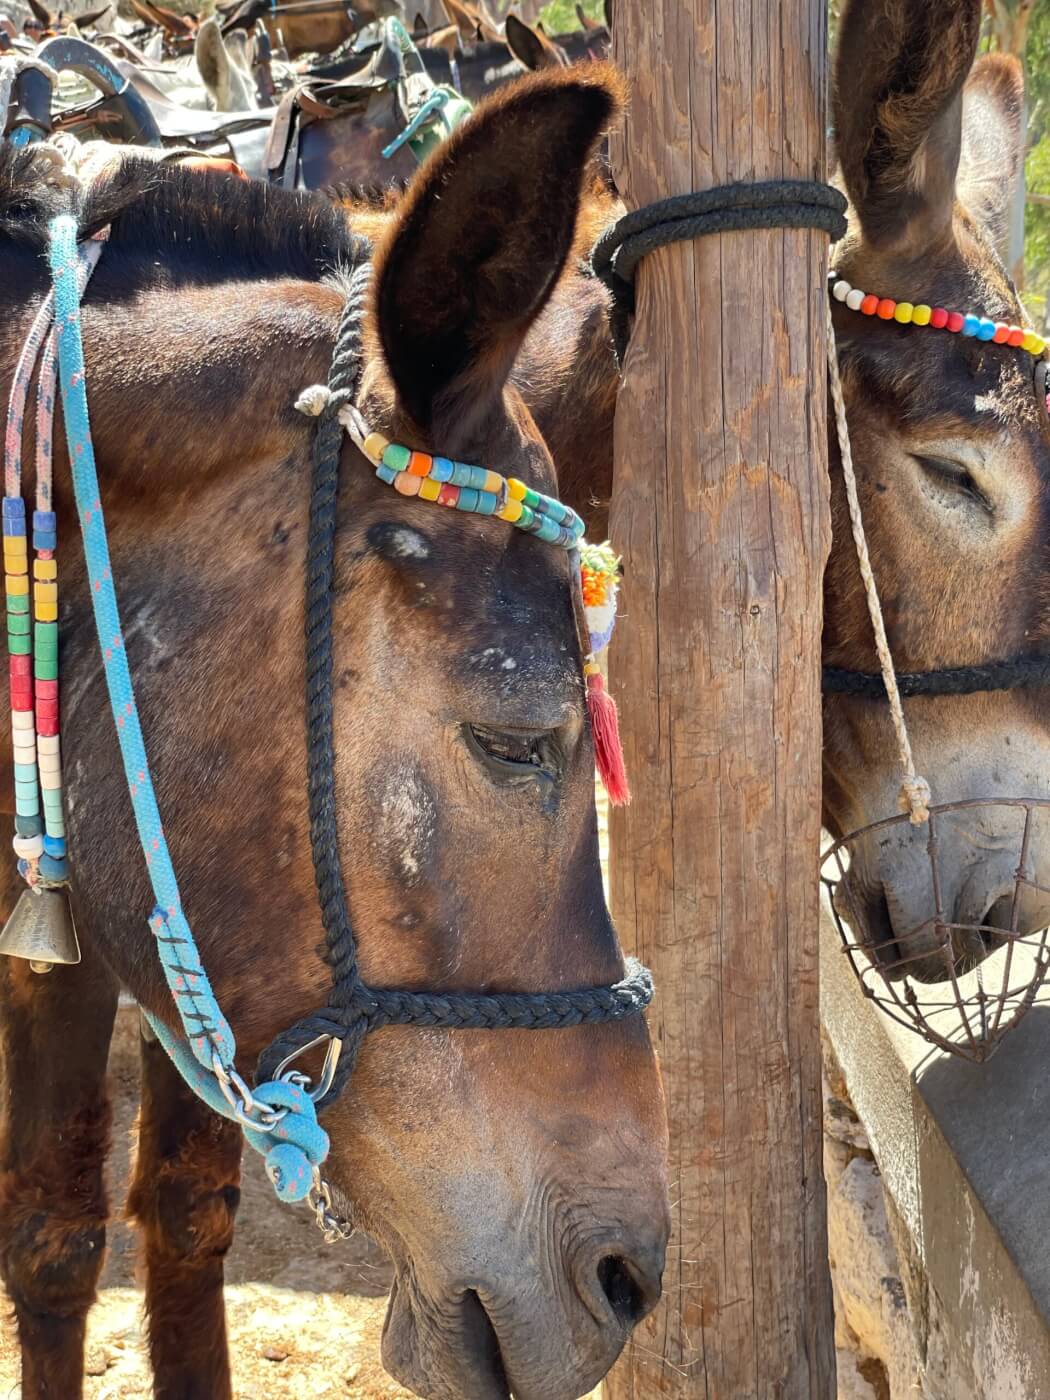 New Footage From Santorini: Donkeys and Mules Are Still Being Abused! -  News - PETA Australia